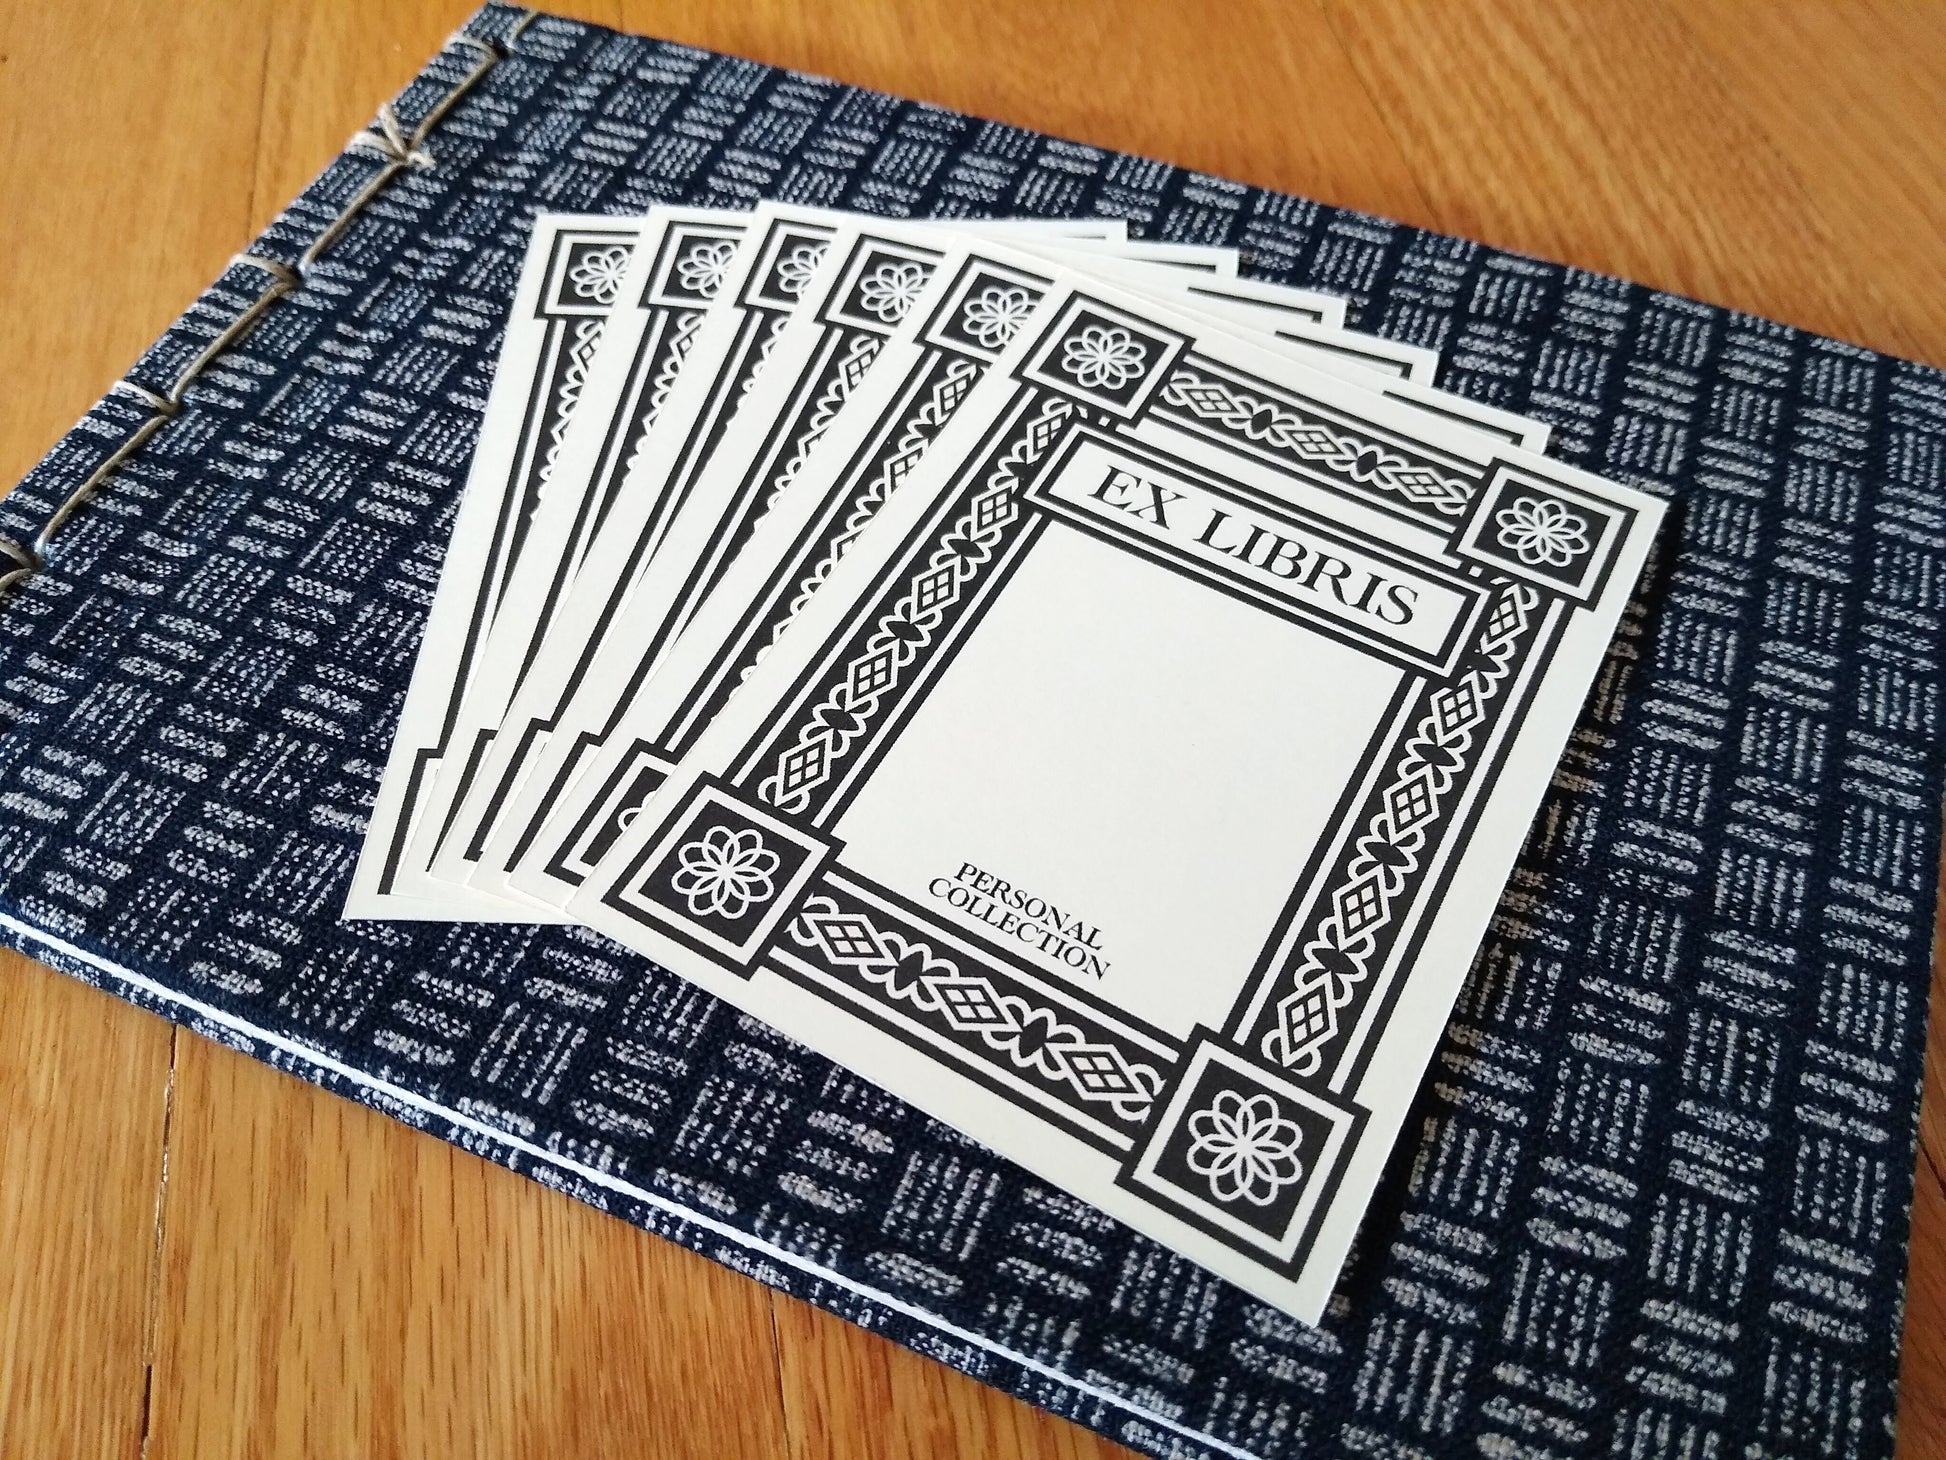 Six black and white bookplates rest on top of a handbound journal with cream and blue hash marks. The bookplates say Ex Libris and Personal Collection, and have a thick art deco border around the edges.